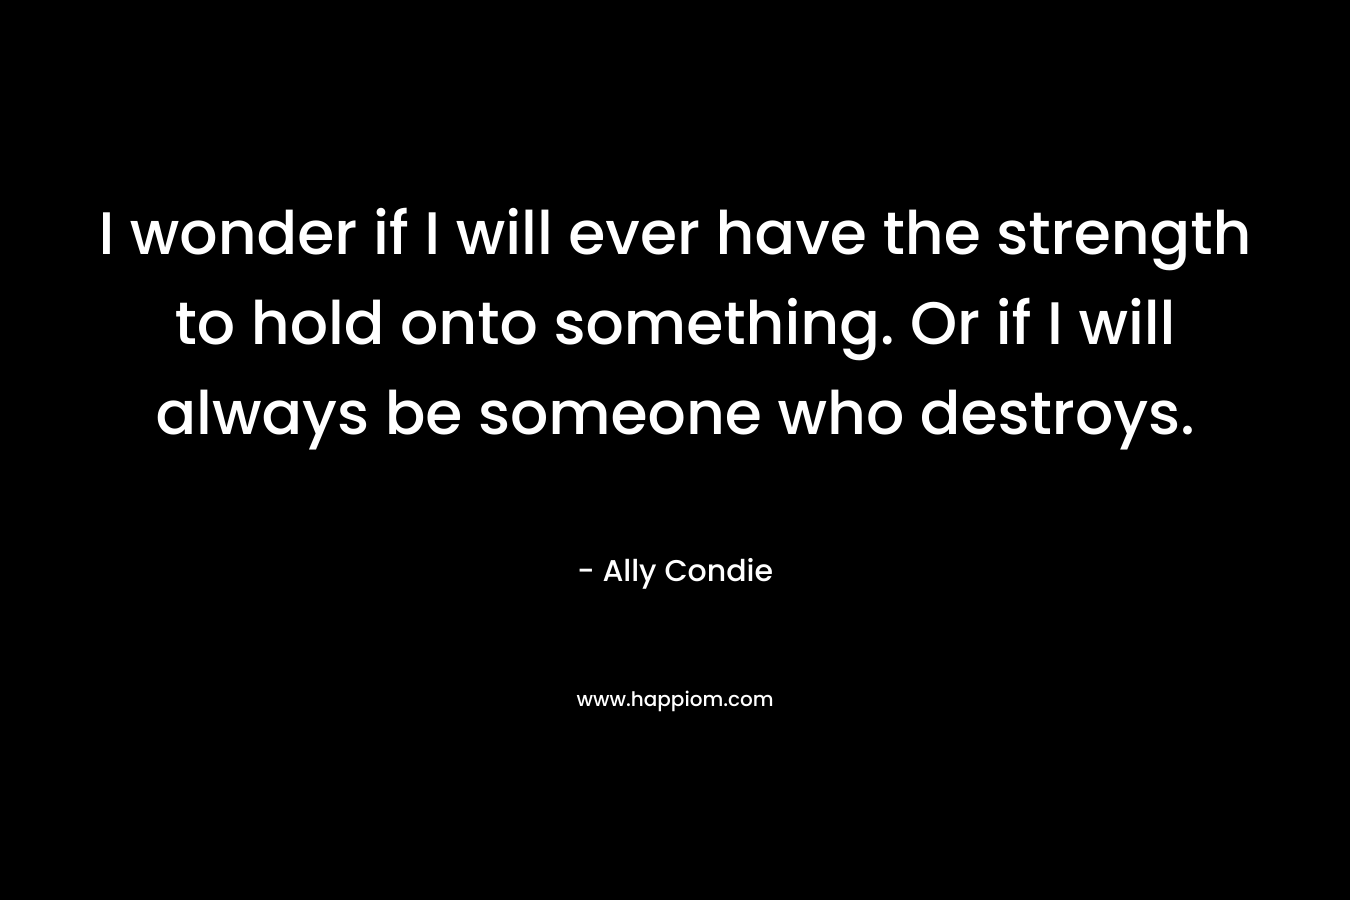 I wonder if I will ever have the strength to hold onto something. Or if I will always be someone who destroys.